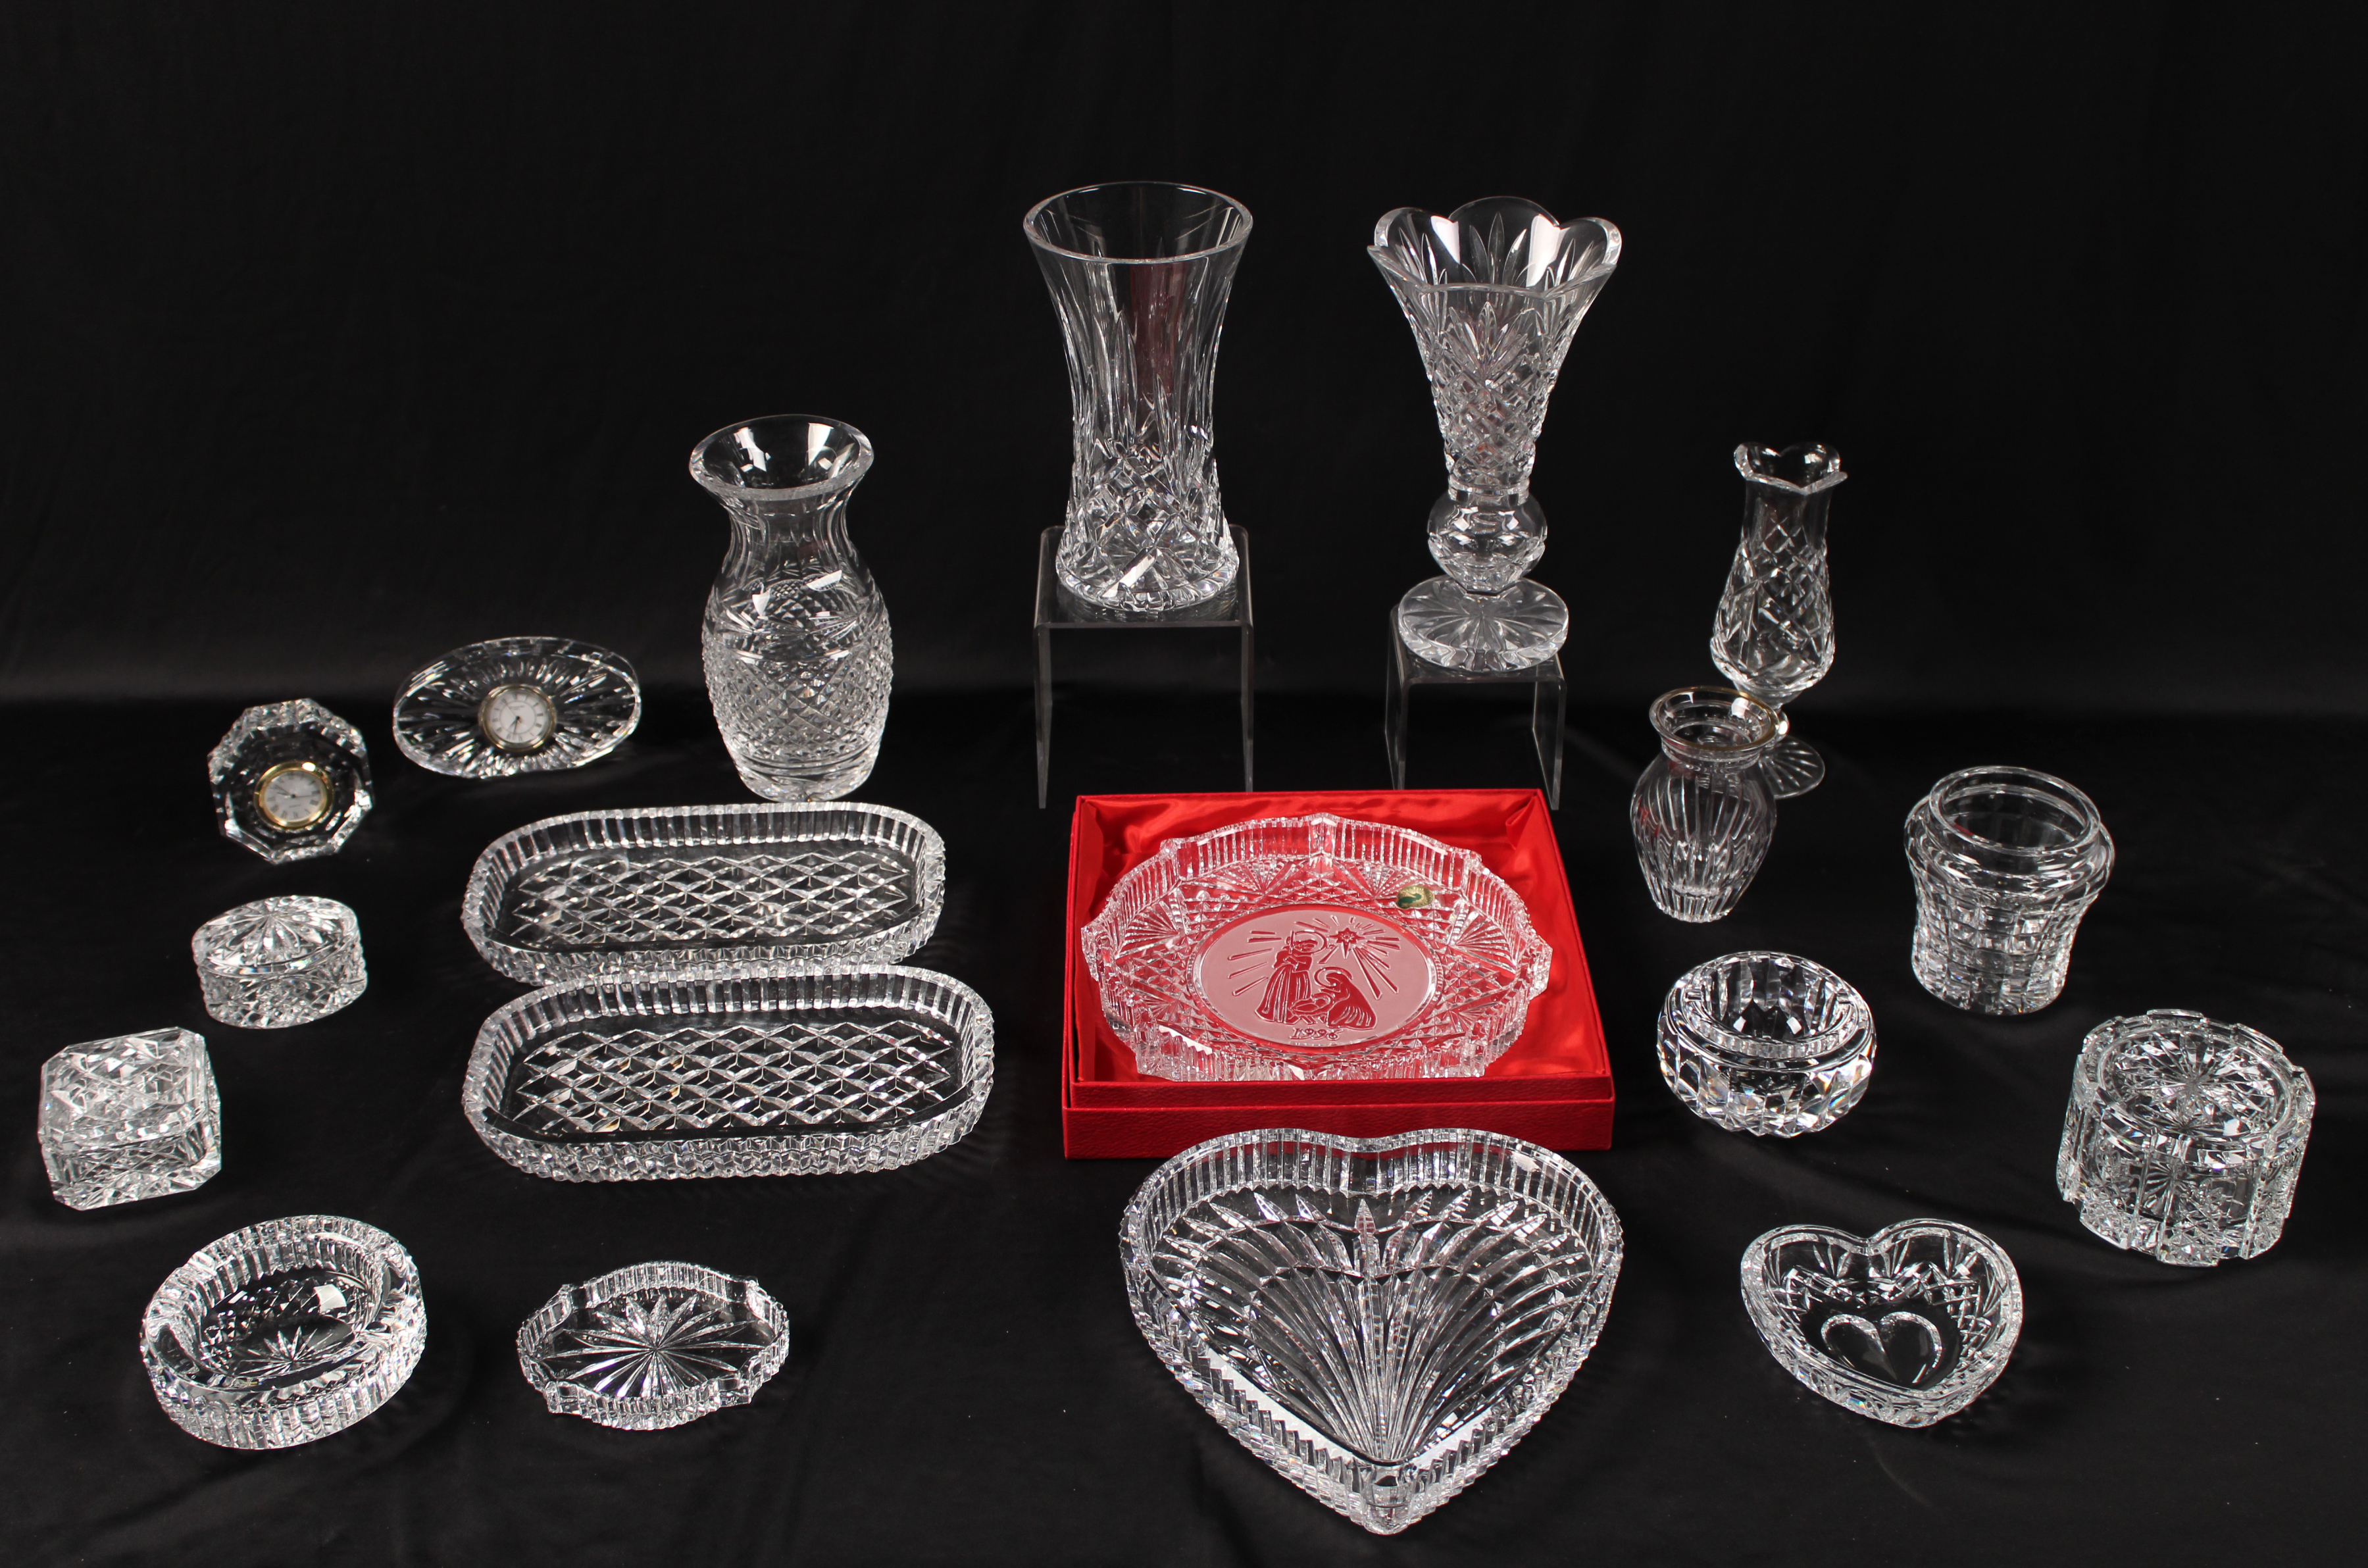 19 PIECES OF WATERFORD CRYSTAL 35fce6